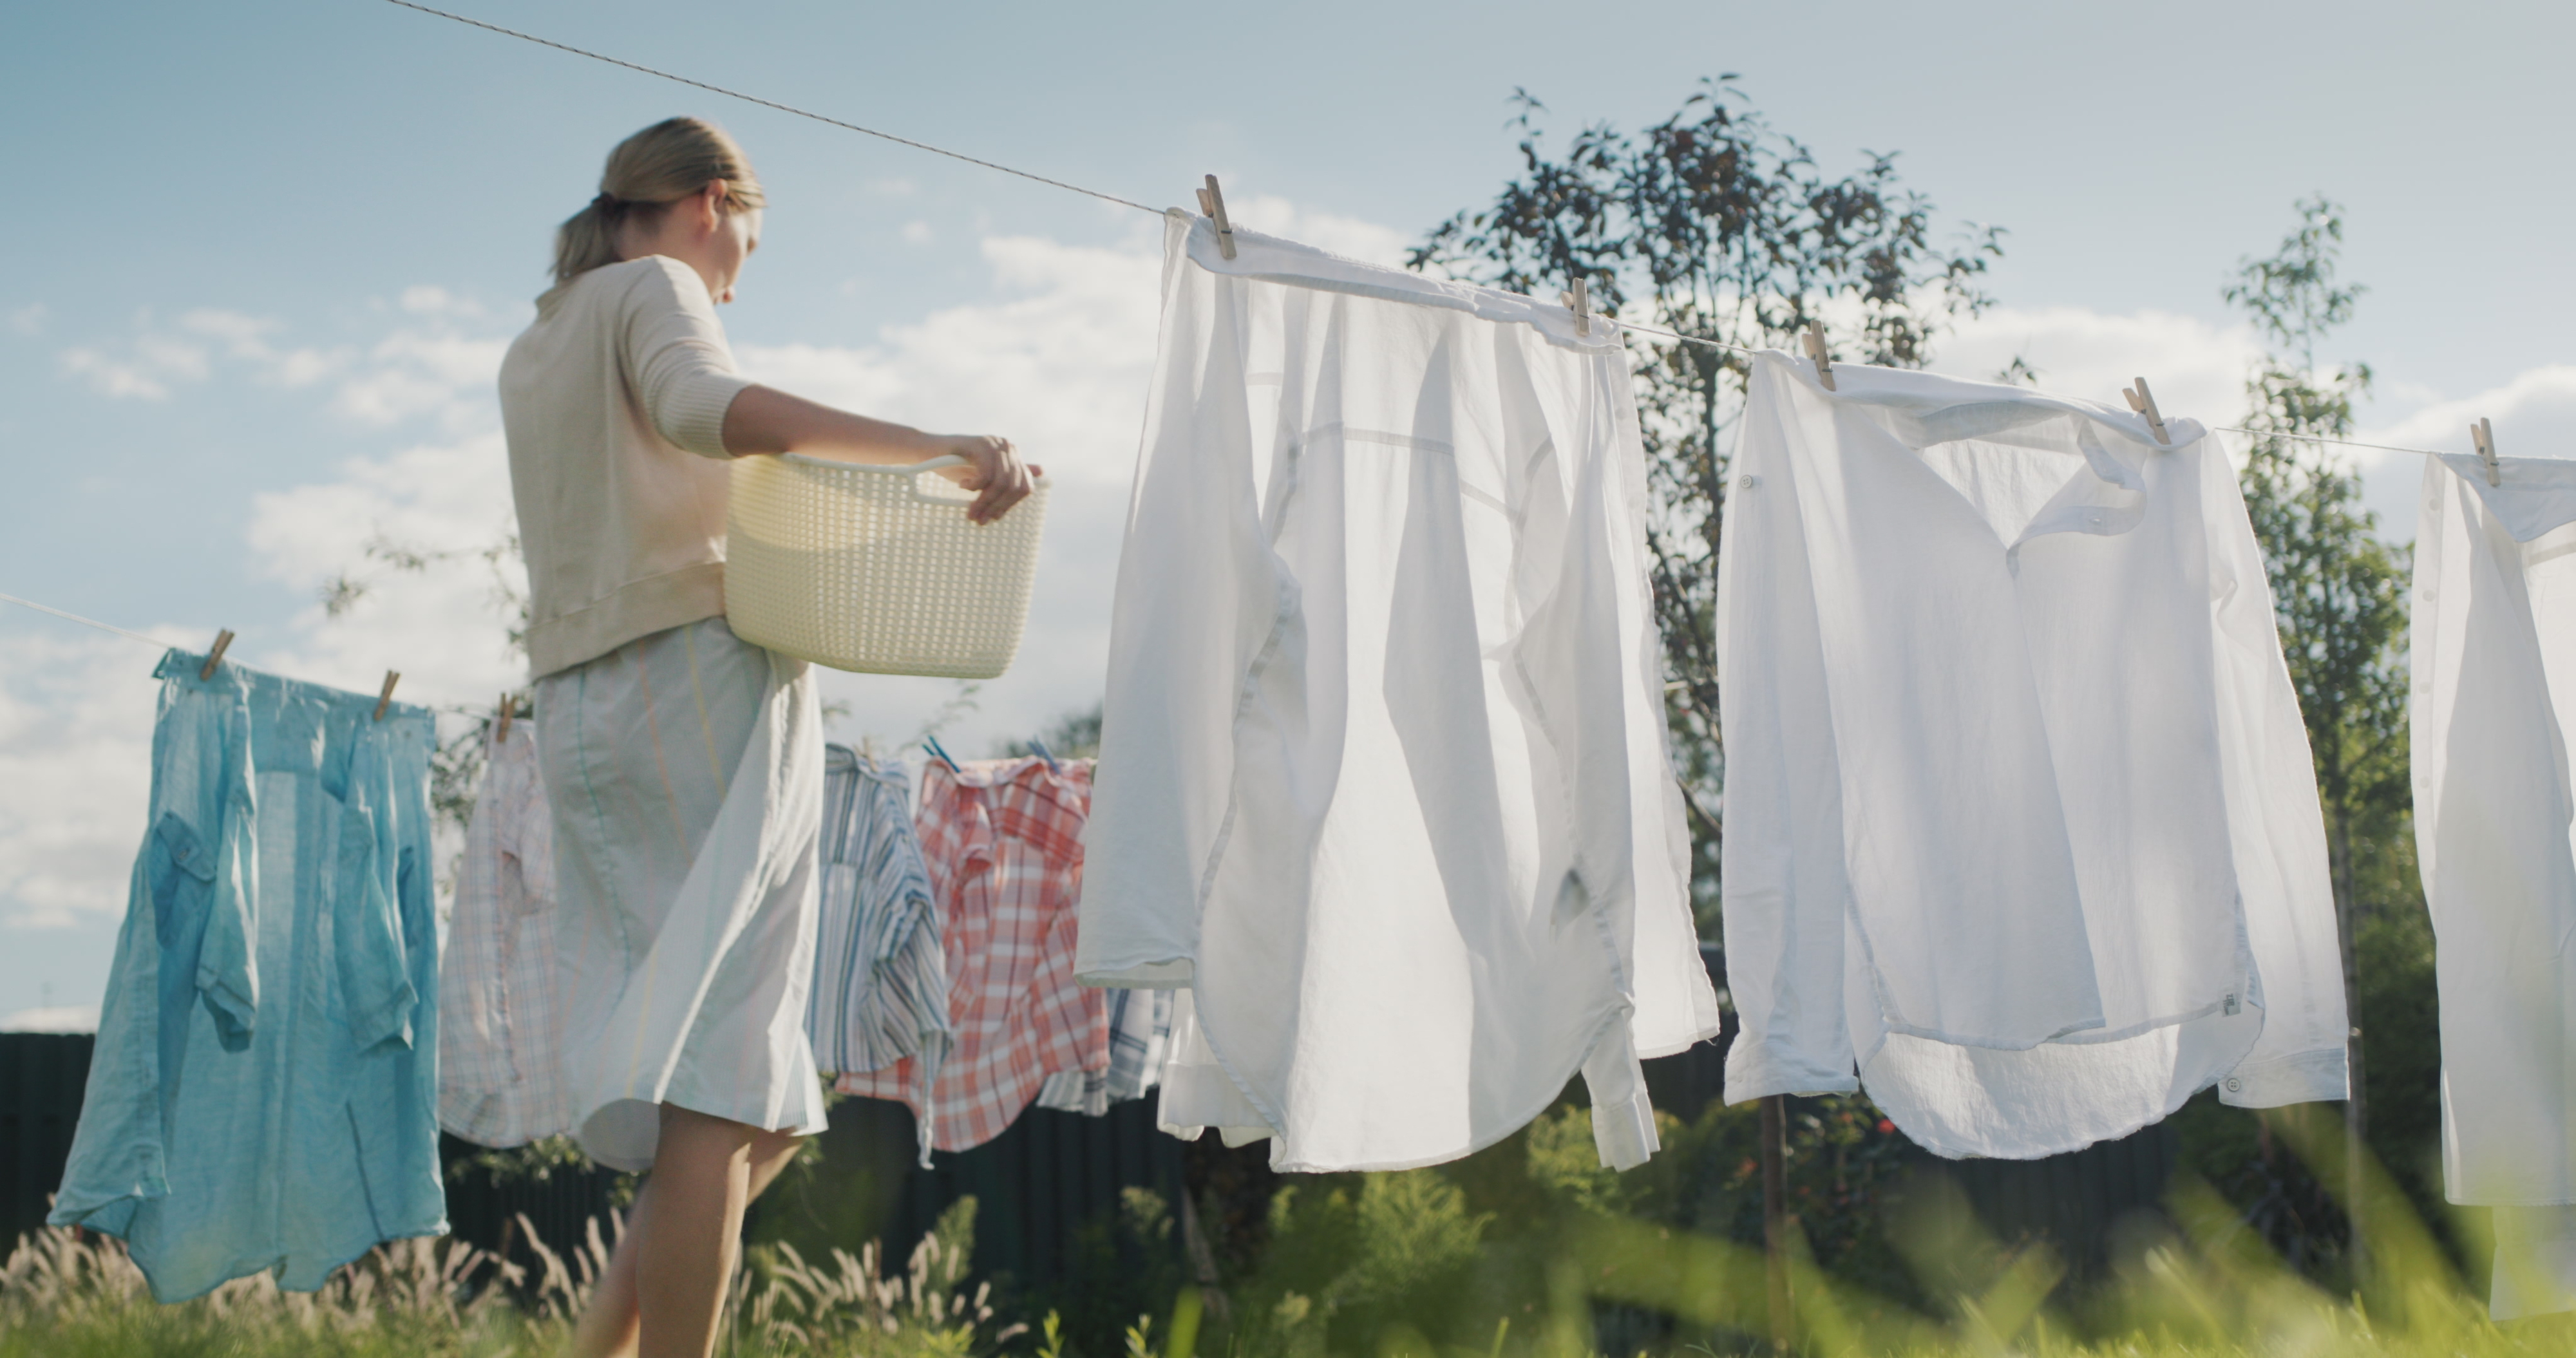 A person hangs freshly washed clothes on a clothesline in a sunny backyard, holding a laundry basket filled with clothes